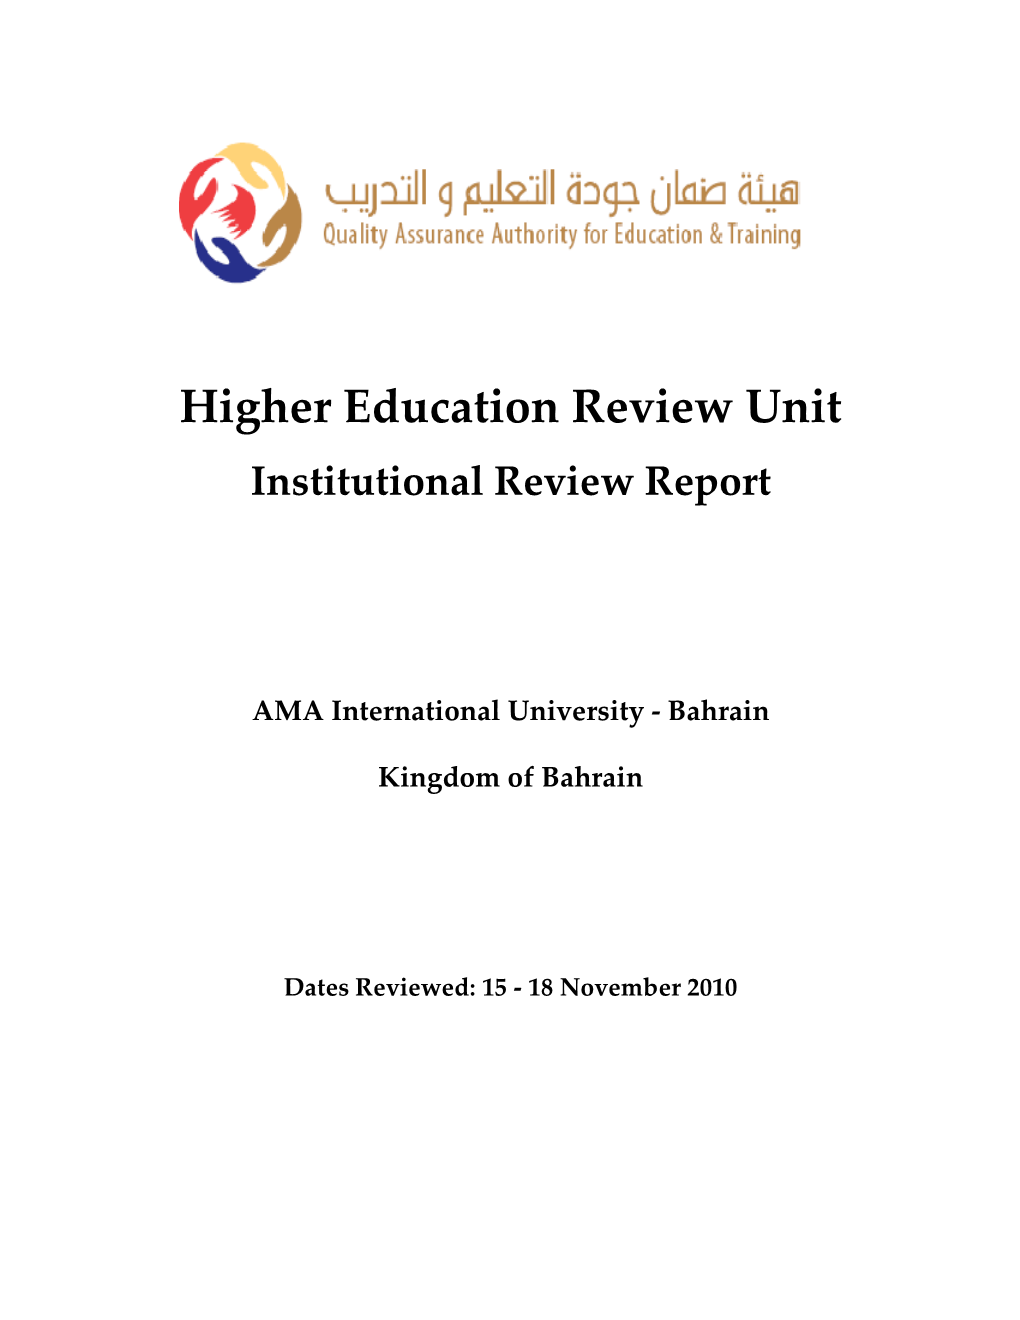 Higher Education Review Unit Institutional Review Report